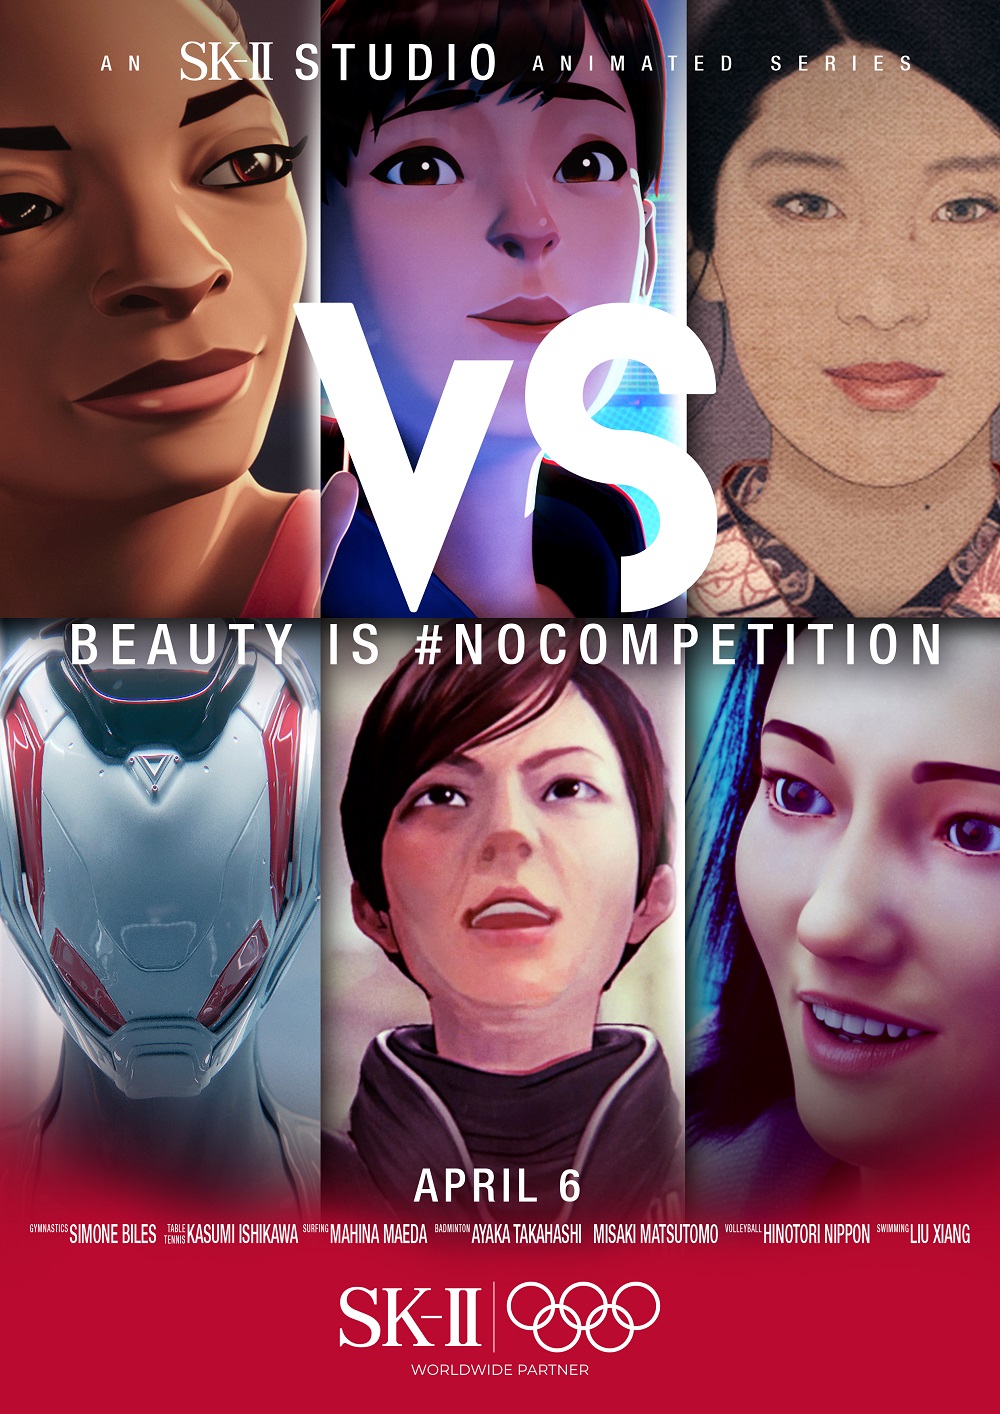 The six Olympic athletes battle it out against massive “kaijus” in “VS” an SK-II STUDIO animated series